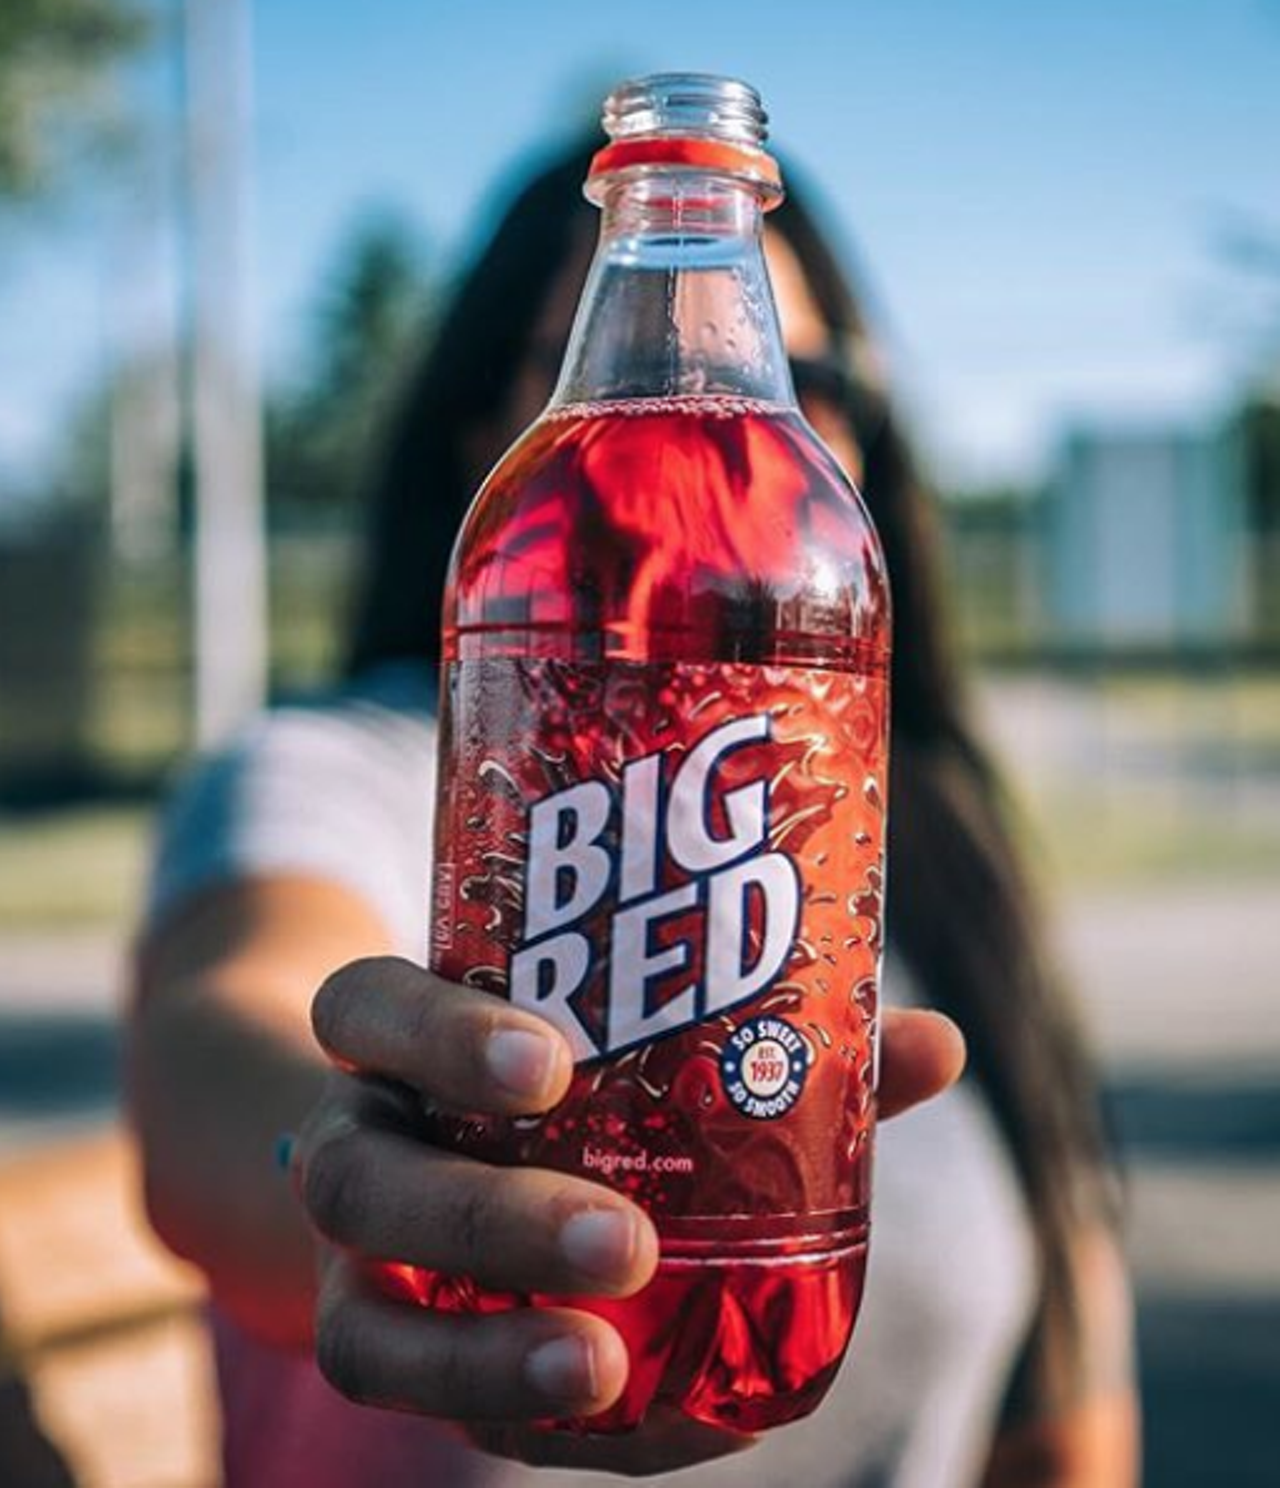 A bottle of Big Red
If you’ve got a big pansita, this is a no-brainer.
Photo via Instagram / drinkbigred